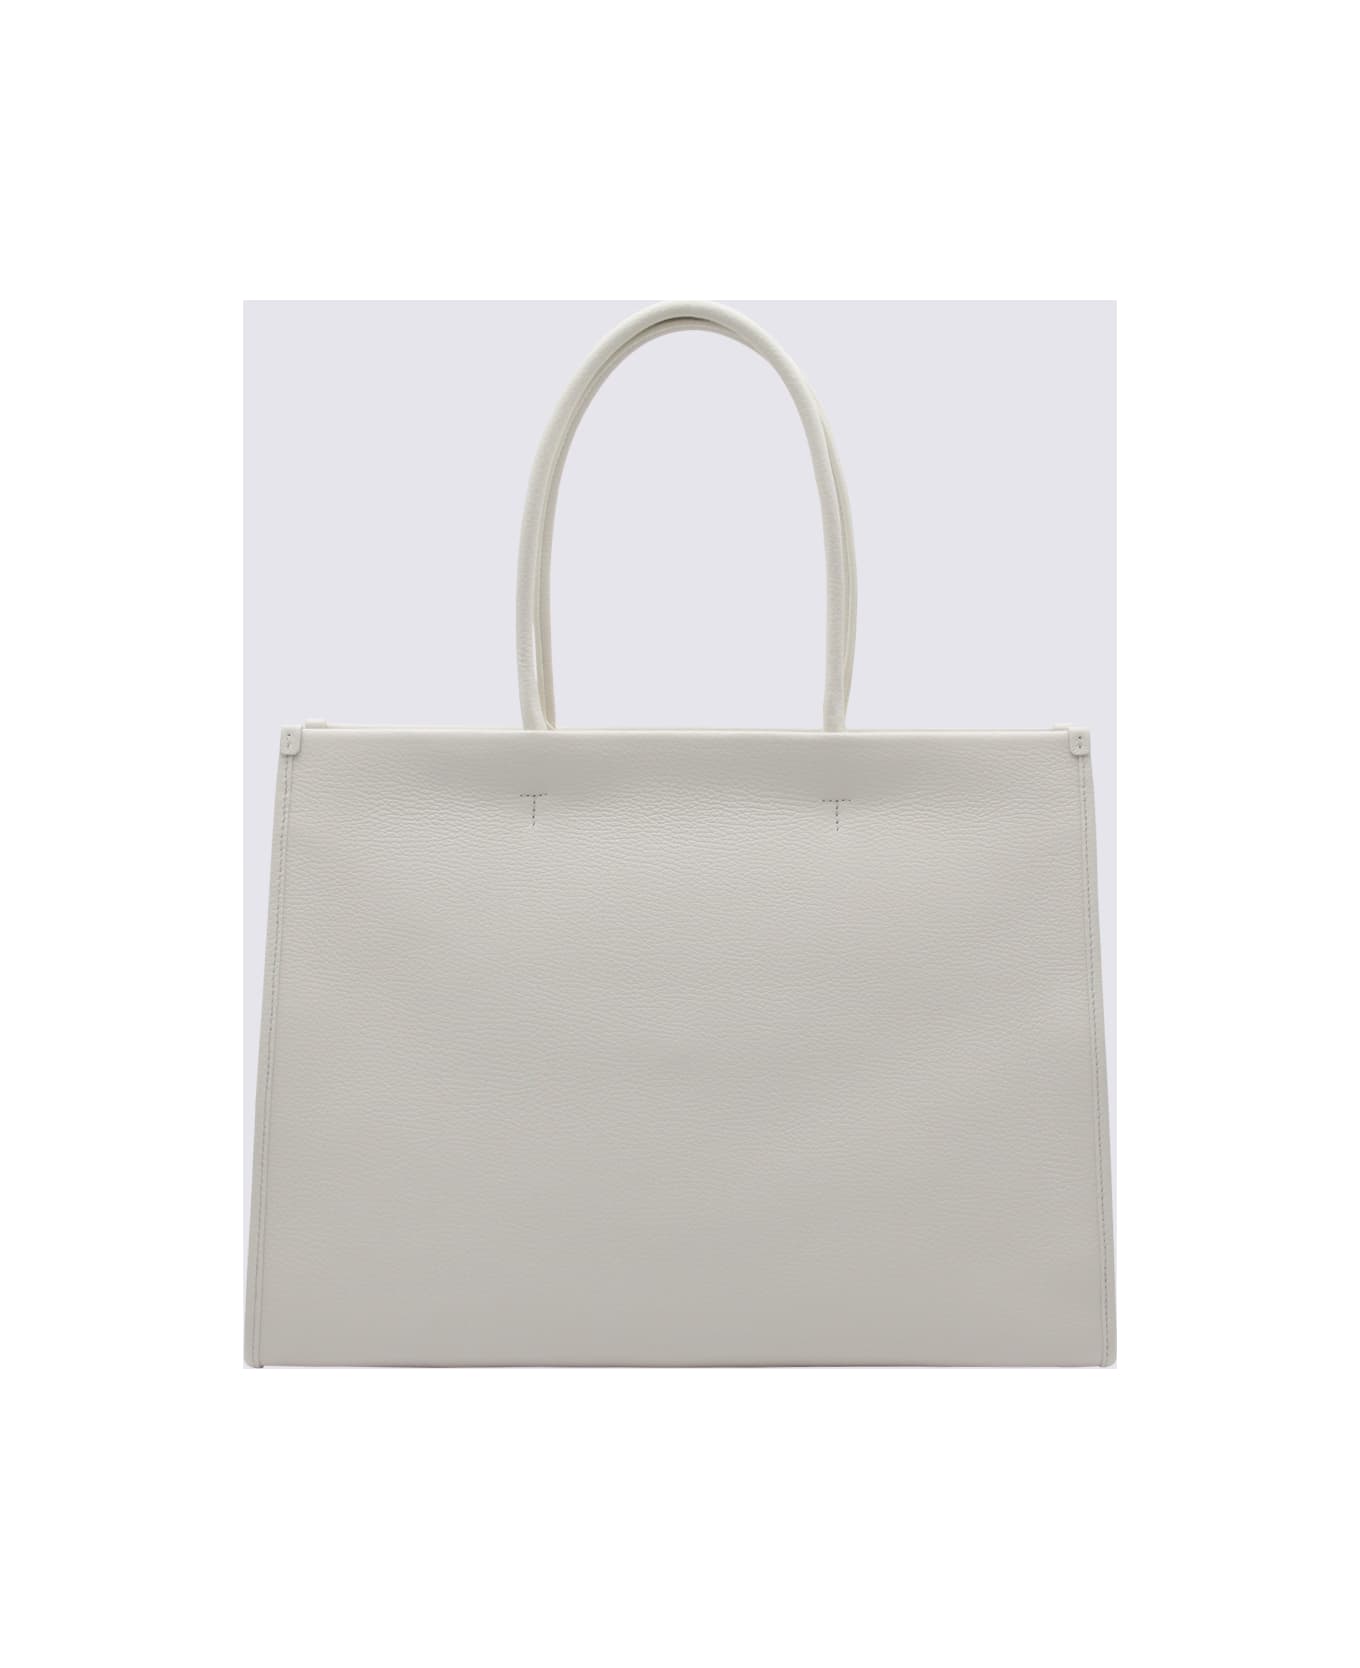 Furla Marshmallow Leather Opportunity Tote Bag - MARSHMALLOW